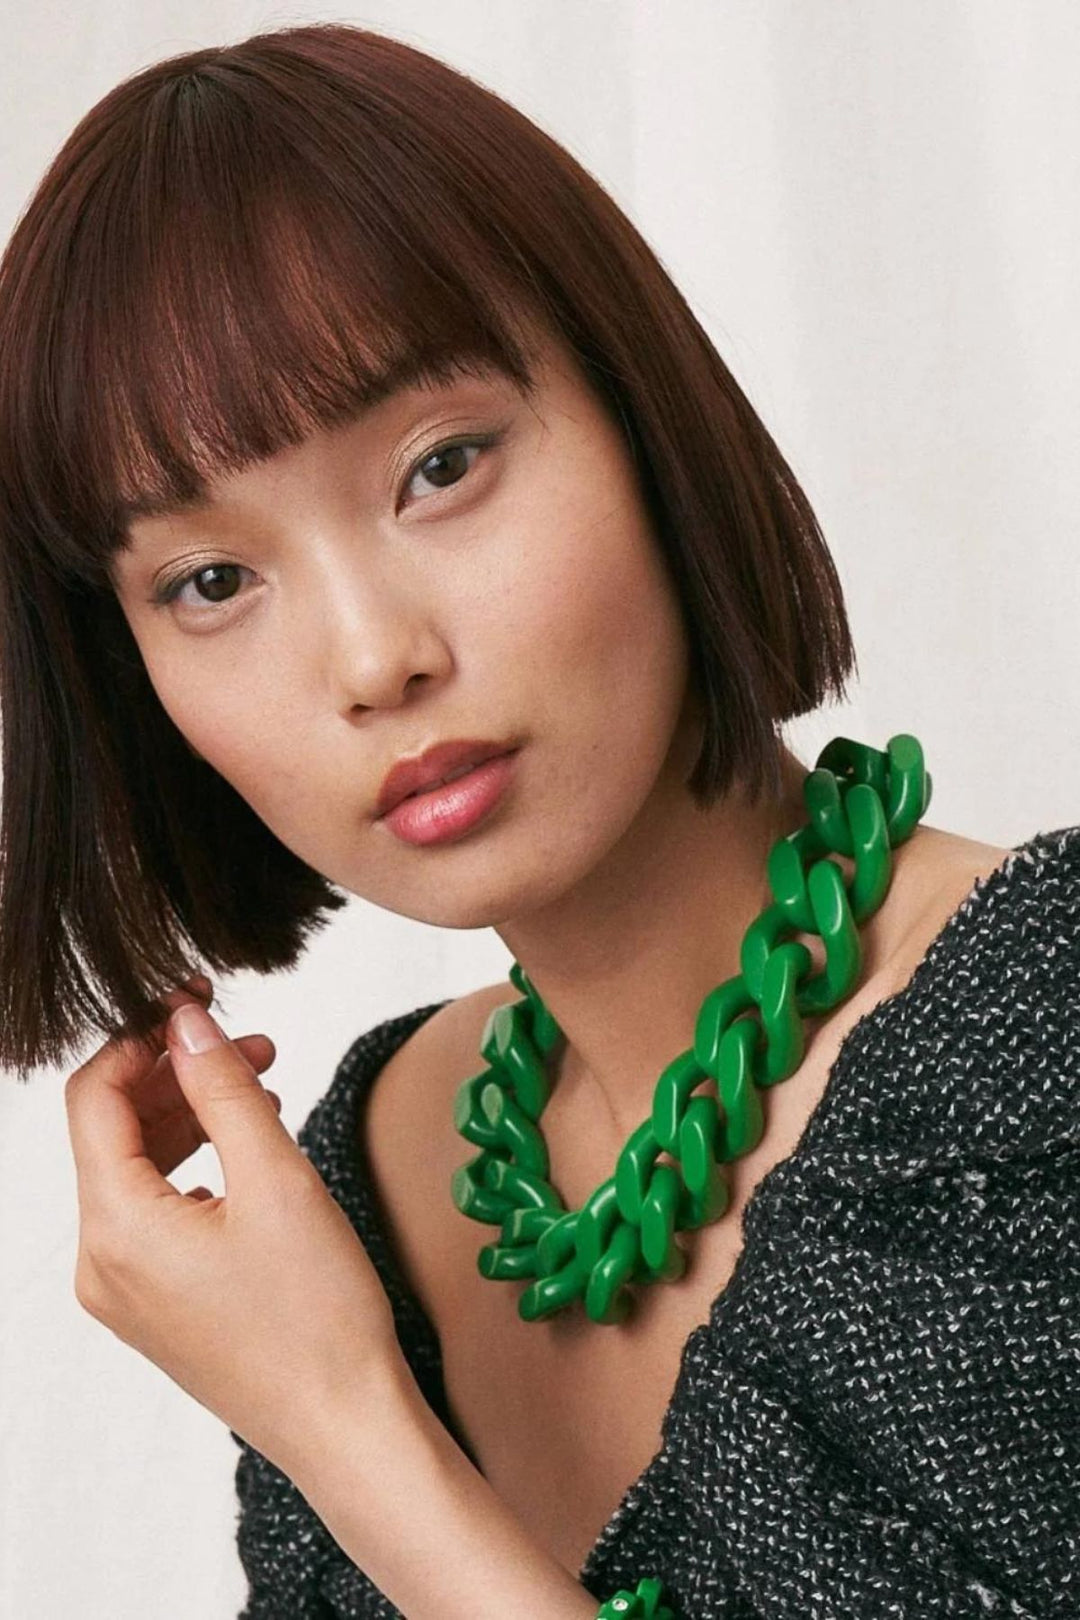 Big Flat Chain Necklace (Green)